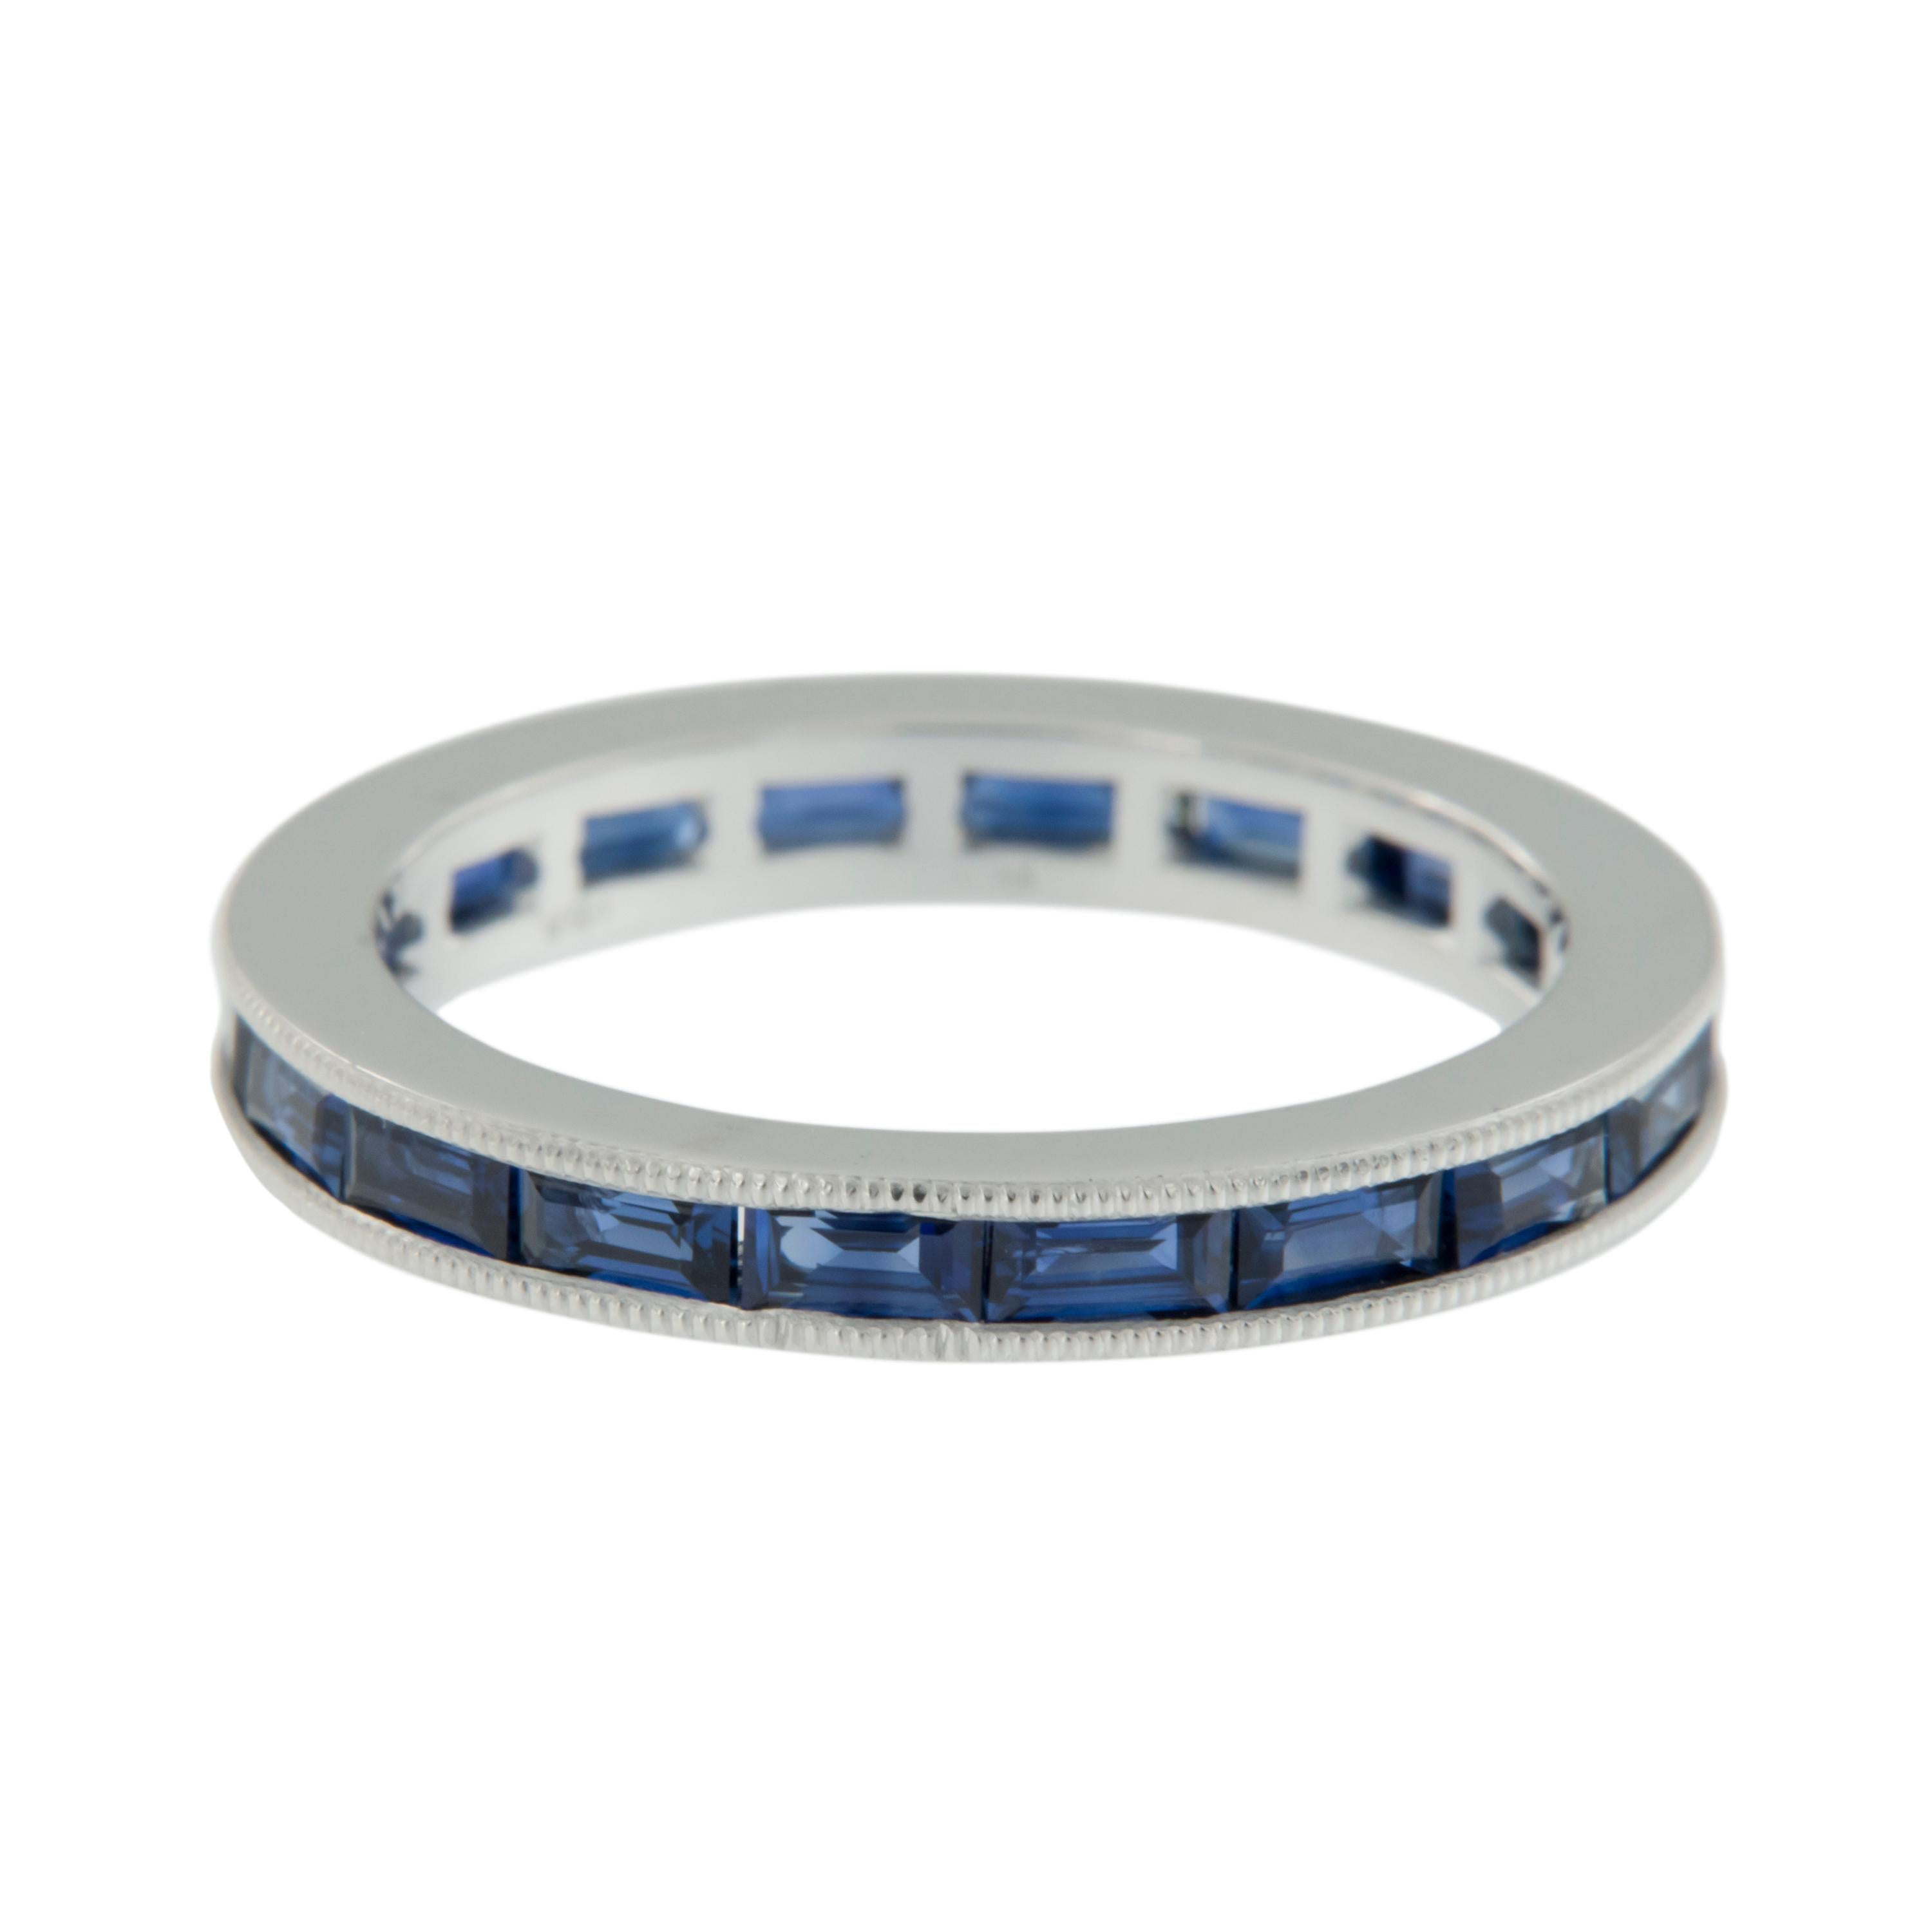 Expertly crafted in 18 karat white gold this timeless baguette cut blue sapphire eternity band is a perfect addition to an existing engagement ring, for wearing alone and also looks fantastic stacked! 18 baguette cut fine quality blue sapphires